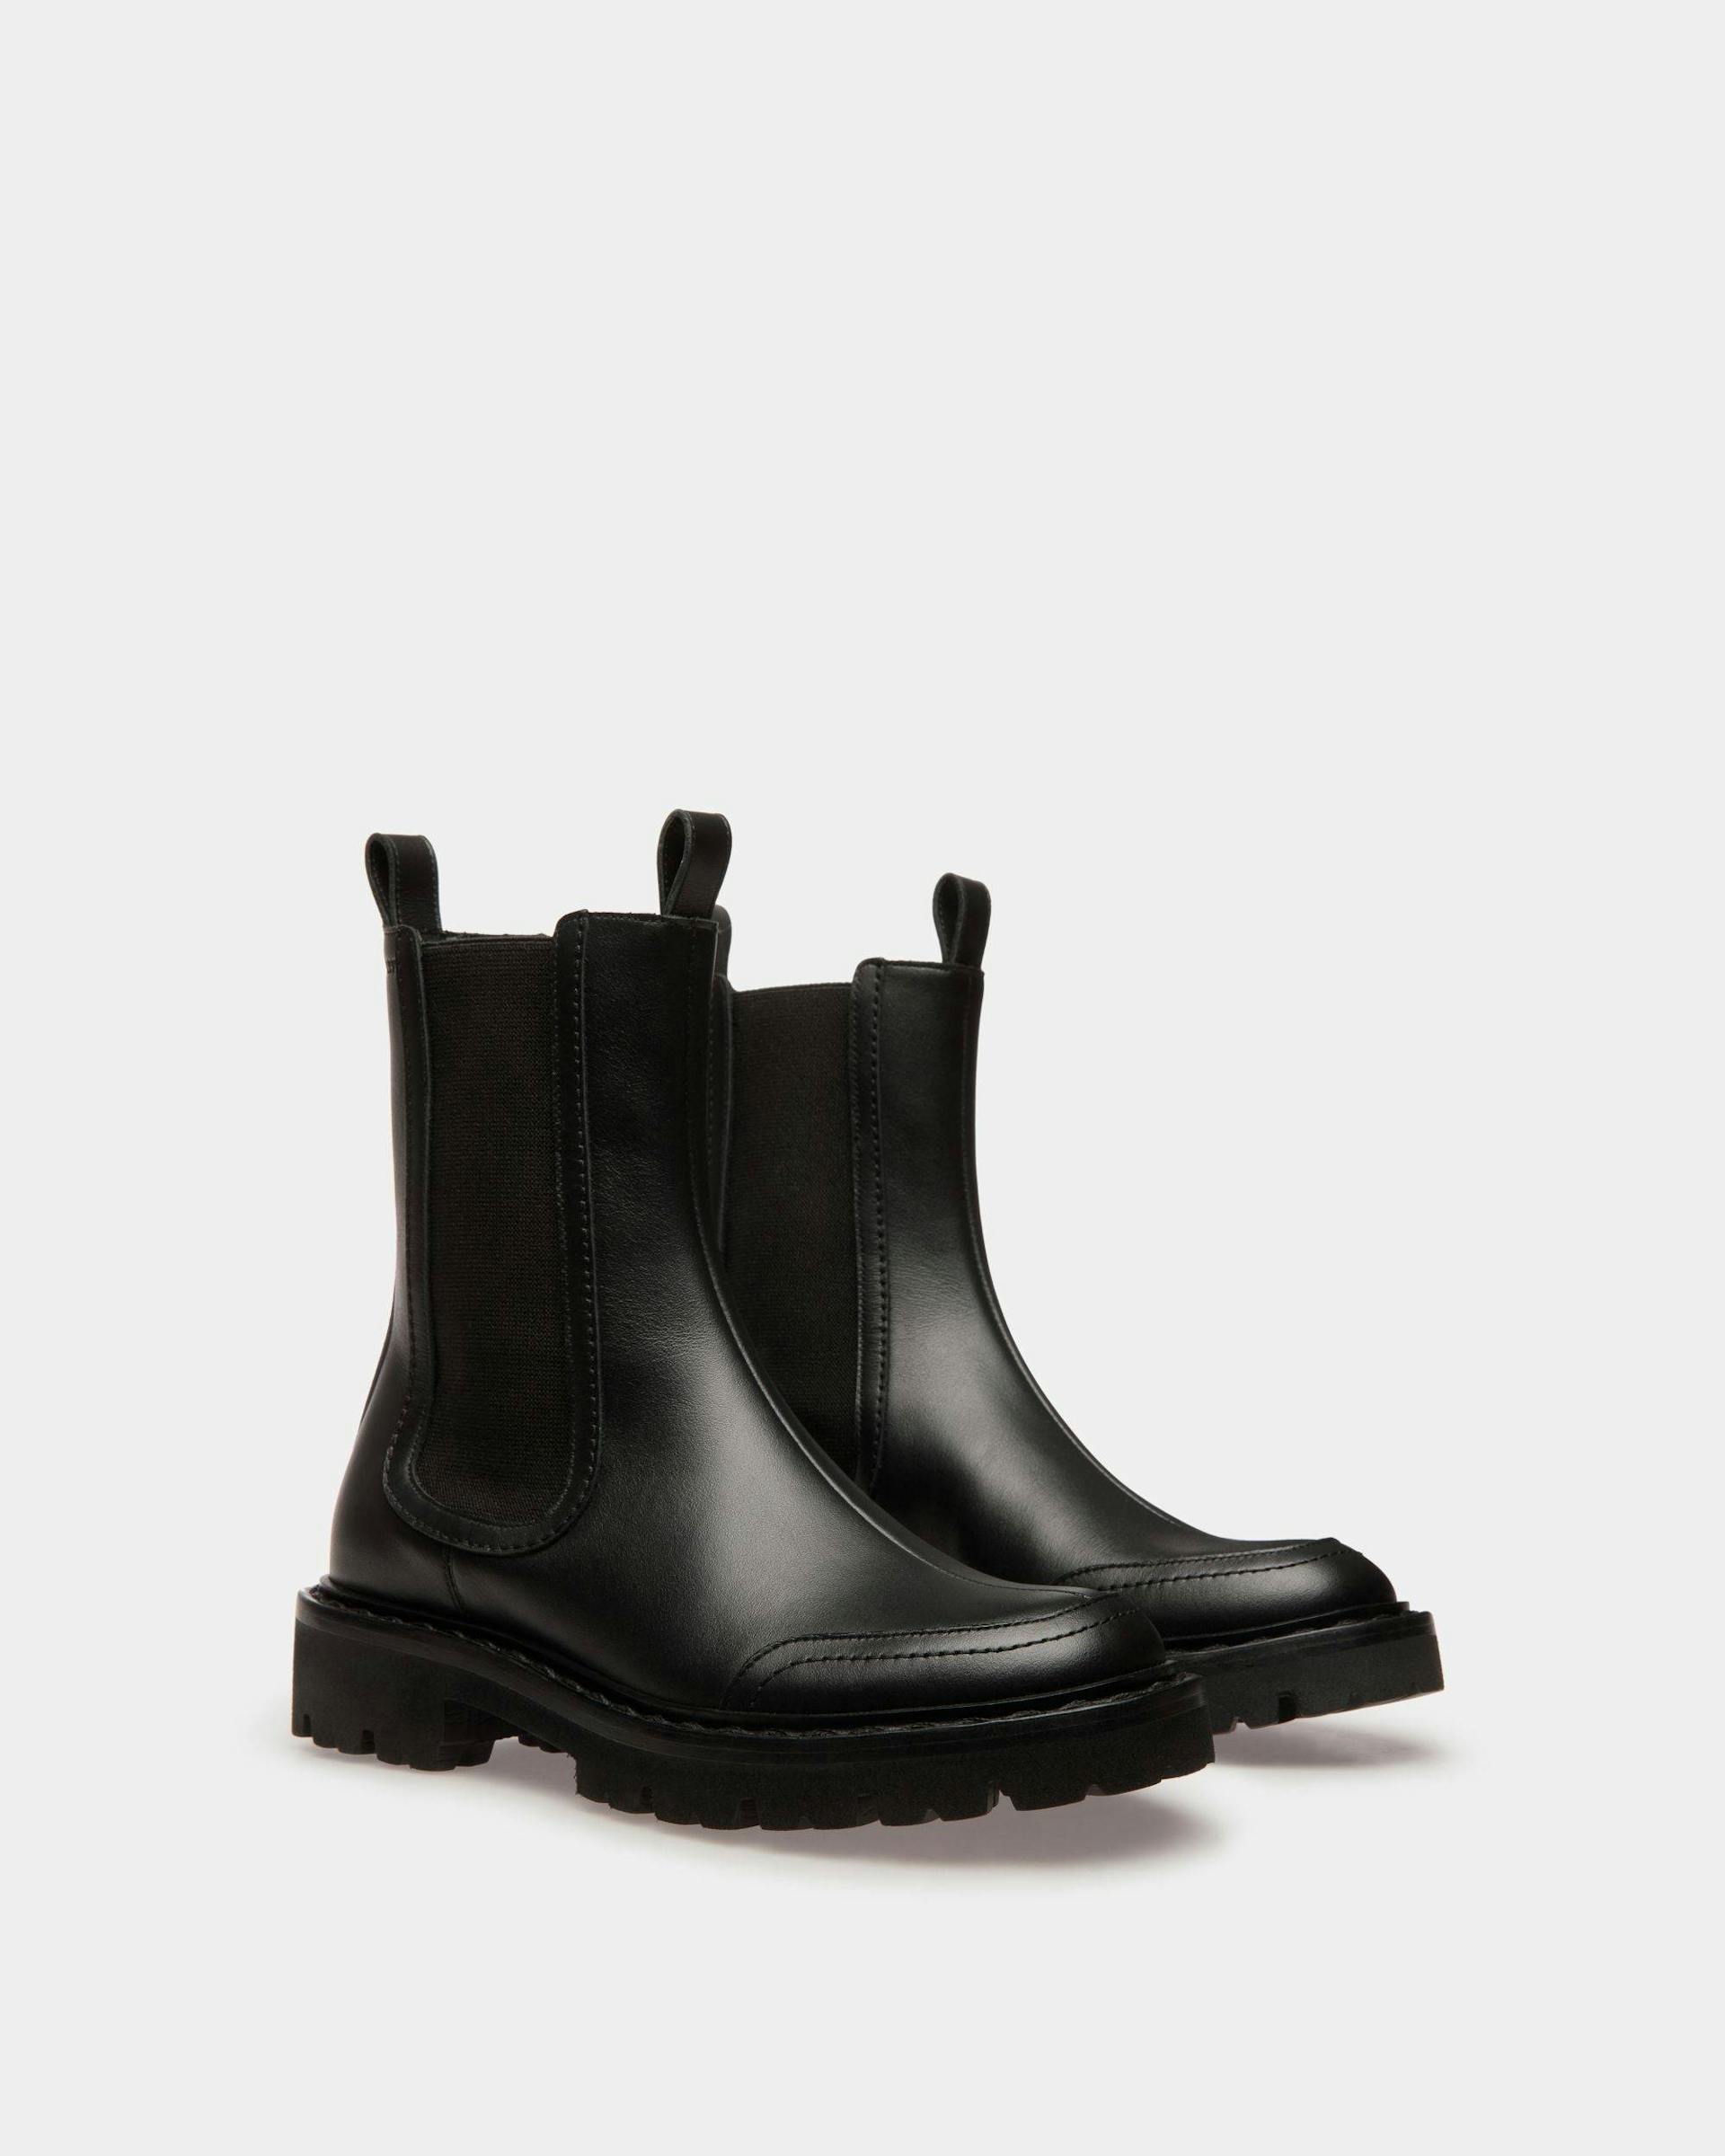 Women's Enga Boots In Black Leather | Bally | Still Life 3/4 Front